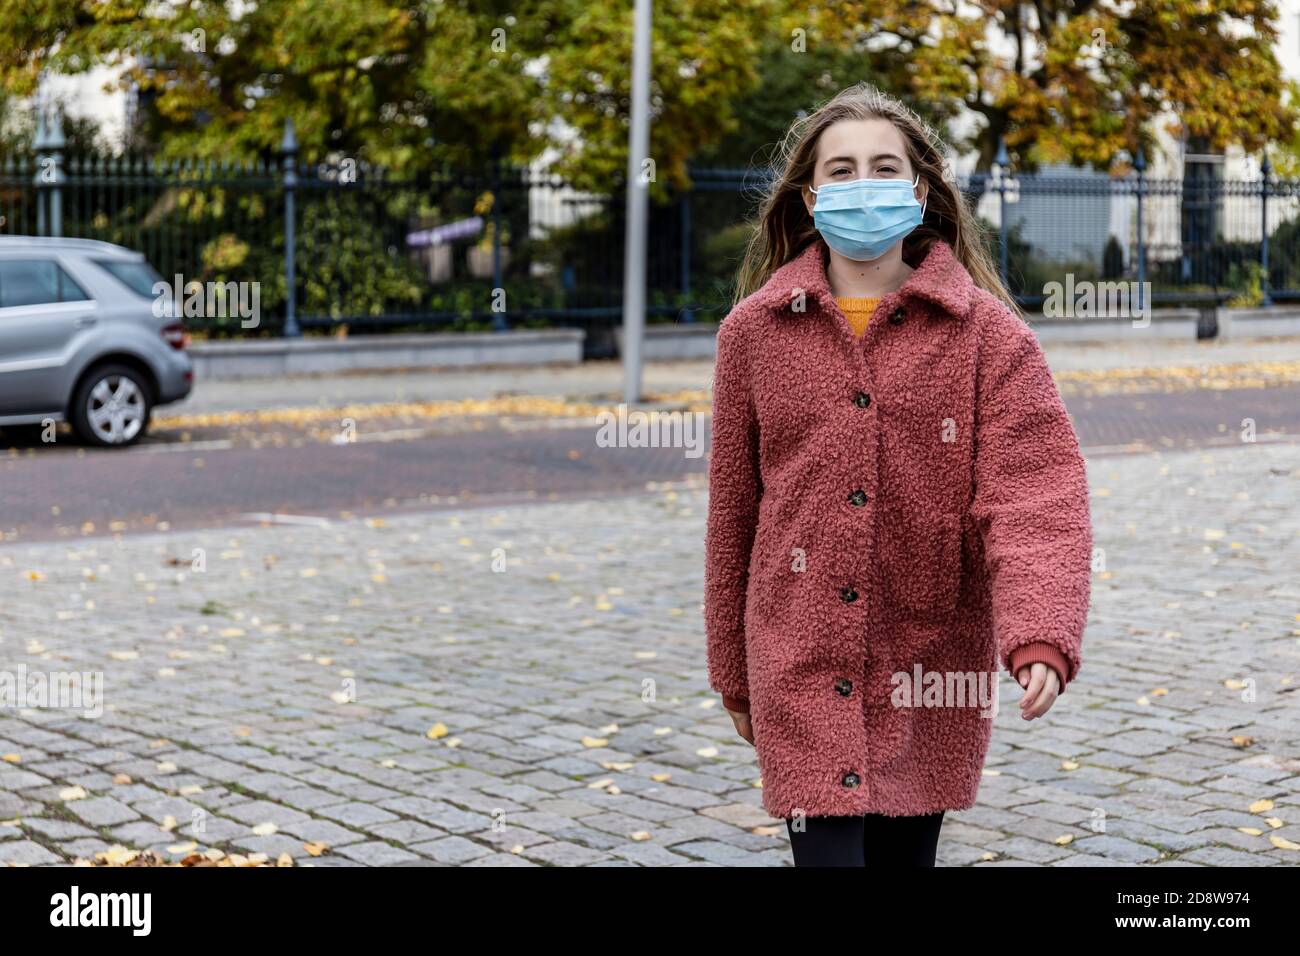 Blonde girl in pink winter coat walking with confidence on a city street wearing a face mask for Corona virus pandemic. Stock Photo